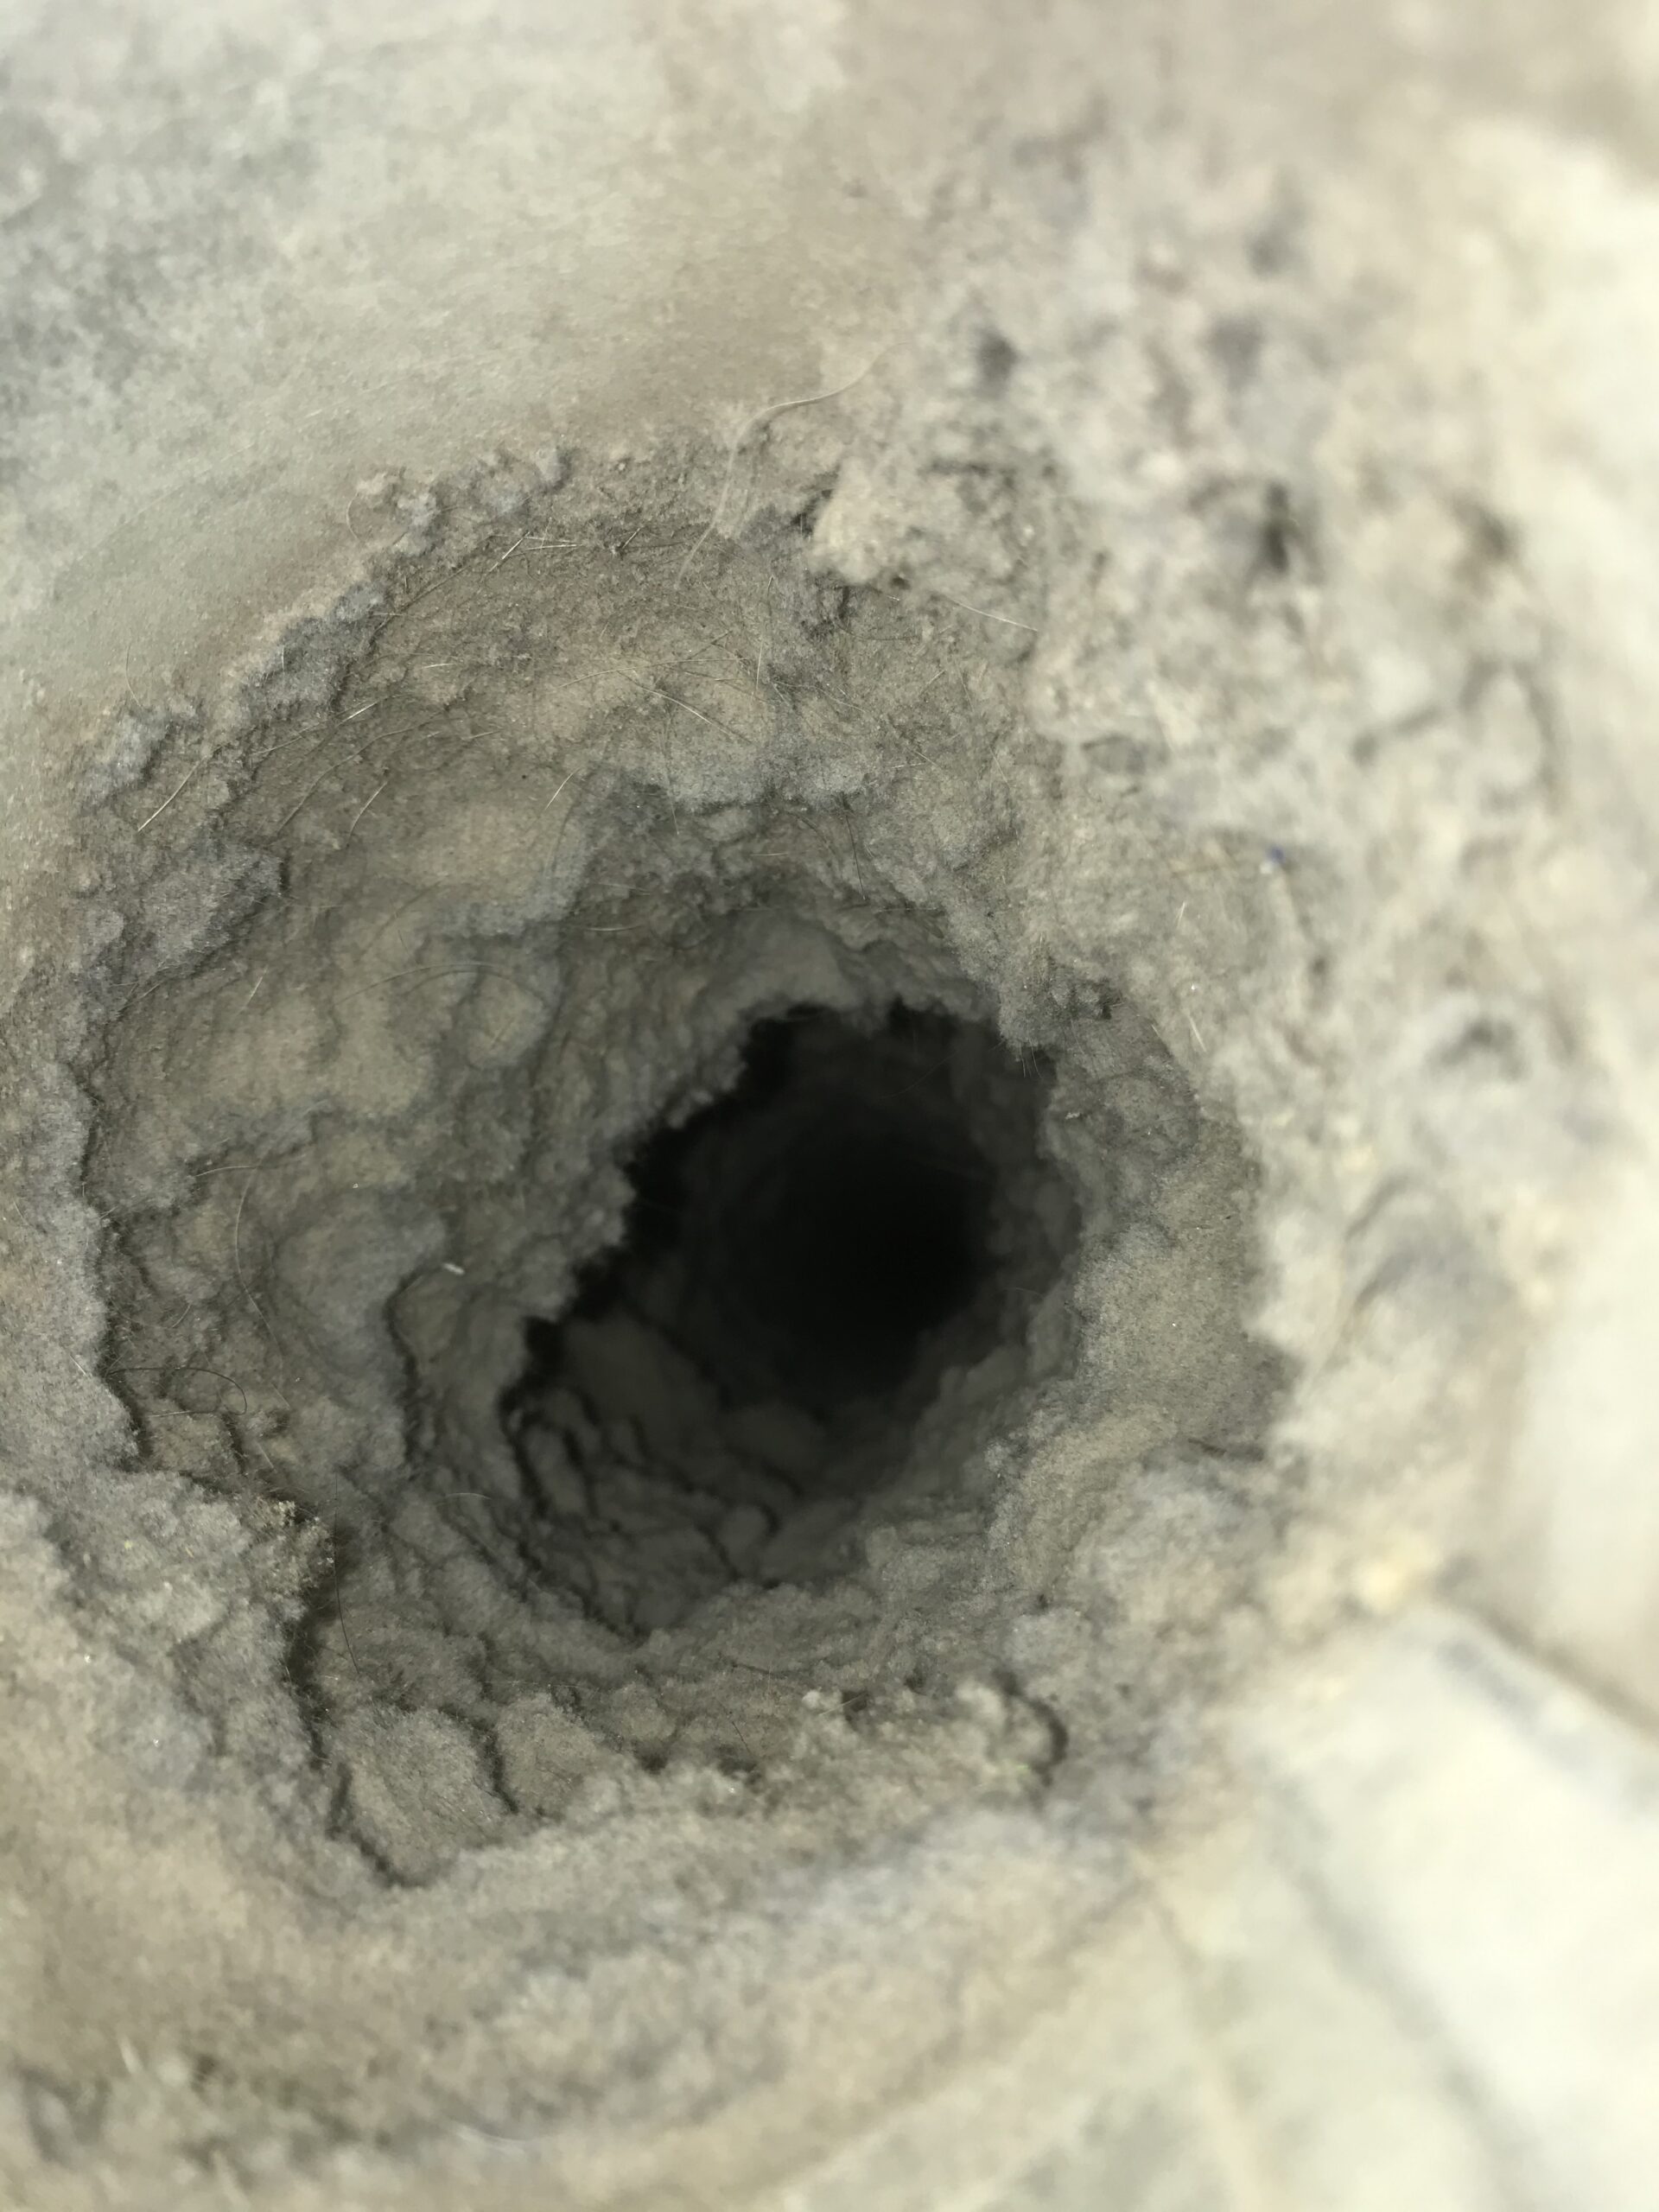 Air Duct and Dryer Vent Cleaning in wilmington nc